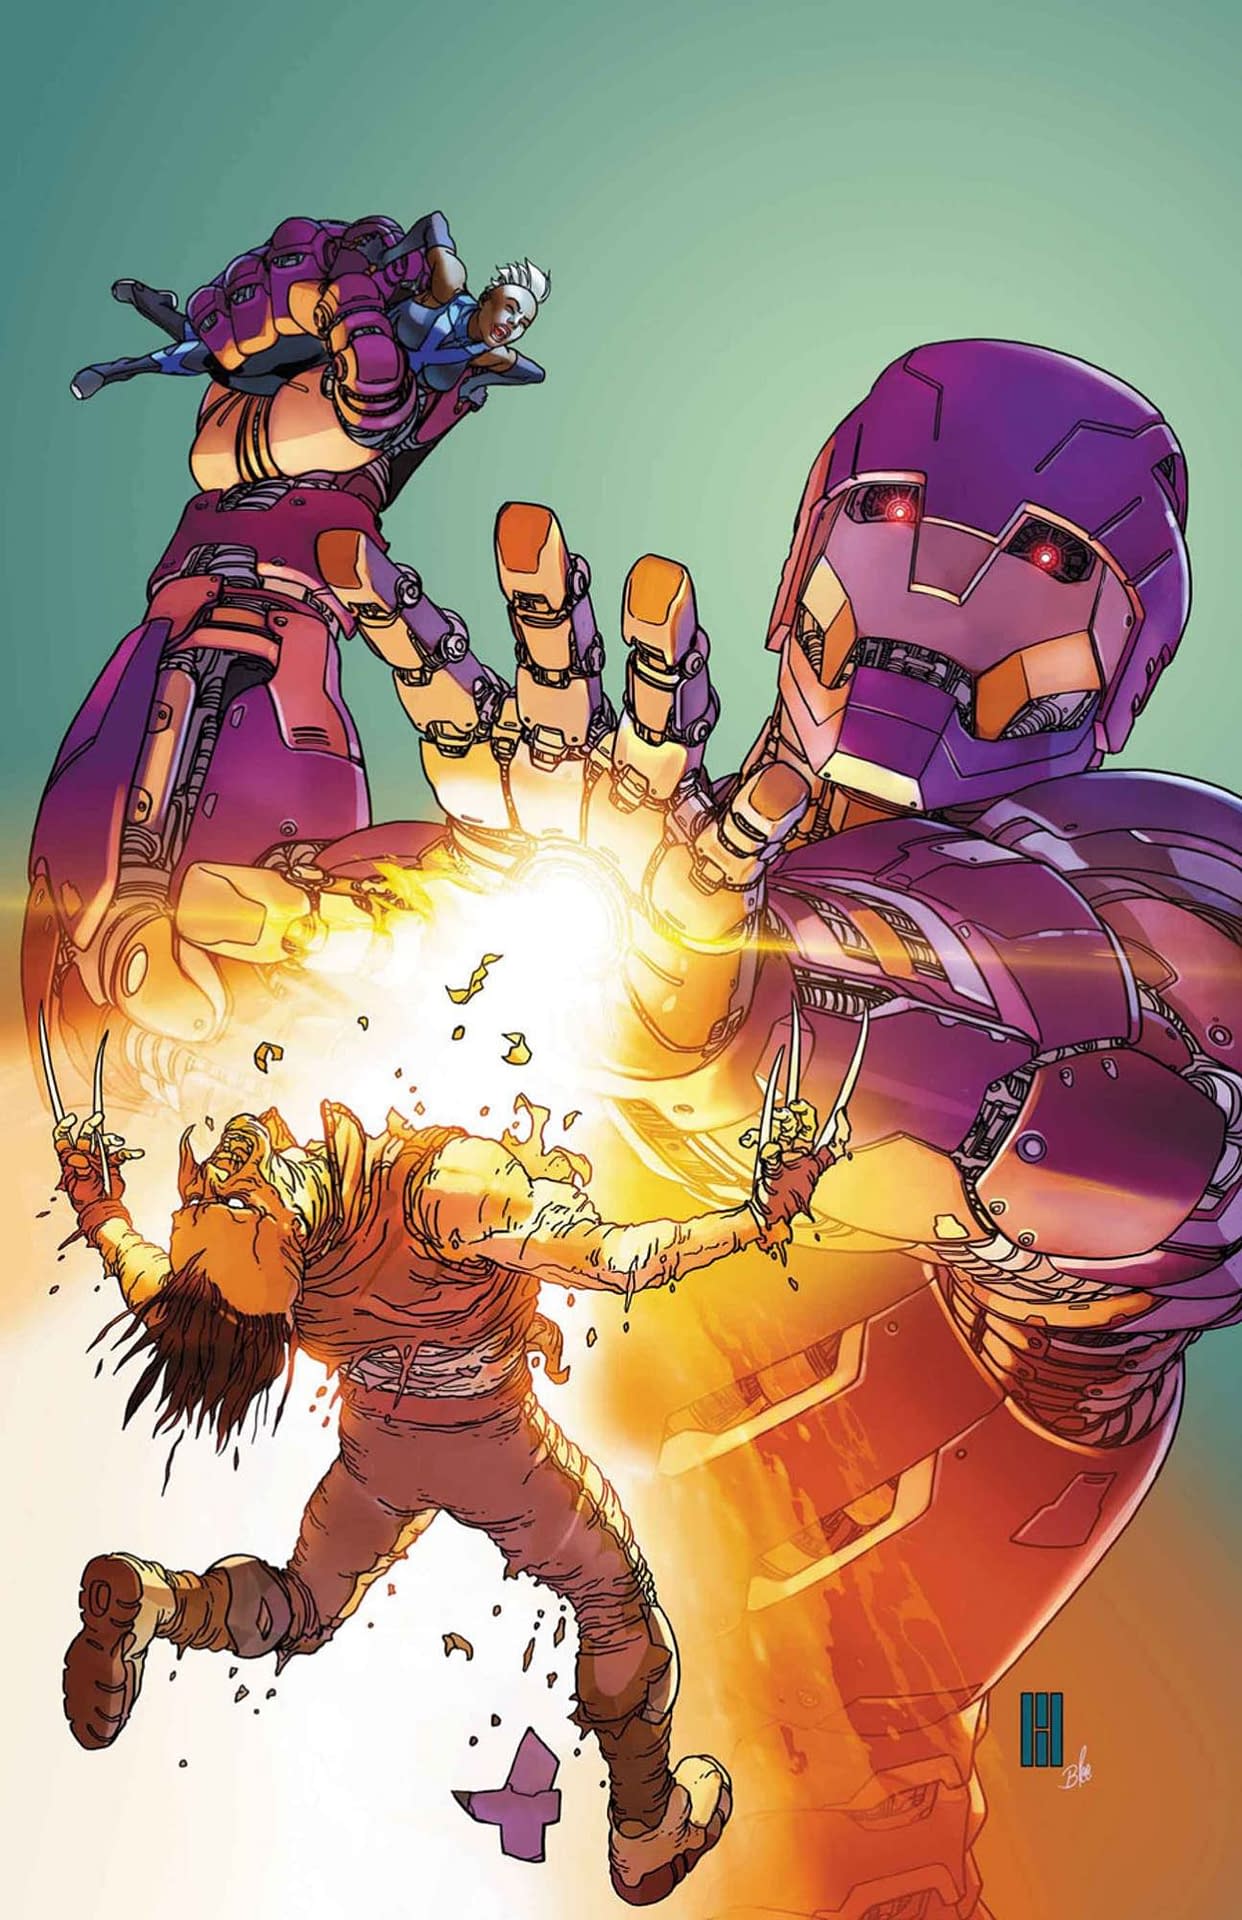 Ch-Ch-Changes: David Marquez and Michele Bandini on X-Men Wedding, Araujo, Armentaro and Robson on Thanos